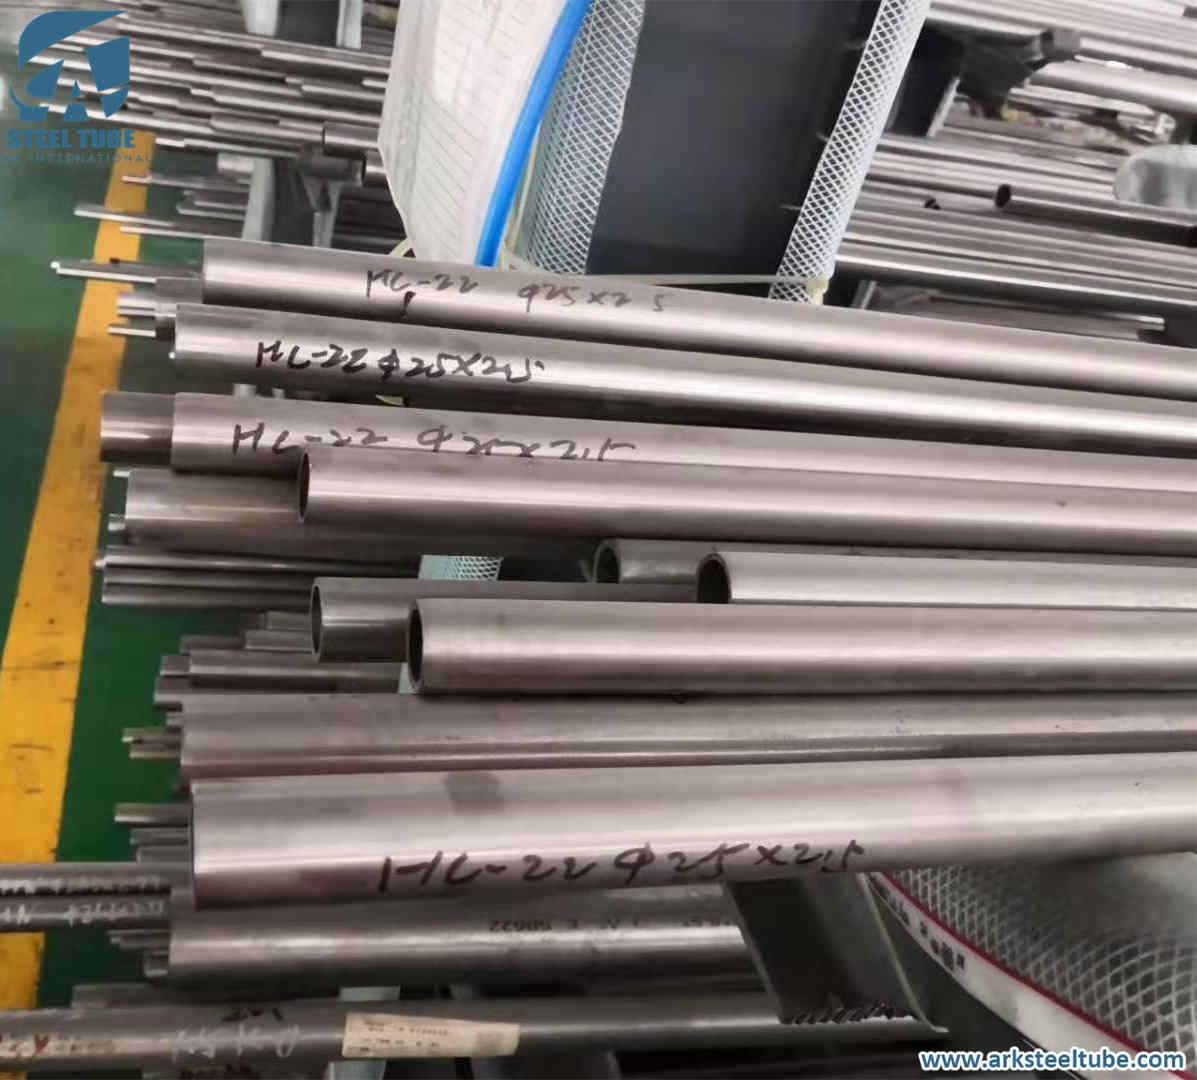 Inconel Alloy 600 601 617 625 690 718 N07718 Seamless Nickel Alloy Tubes Pipes 2